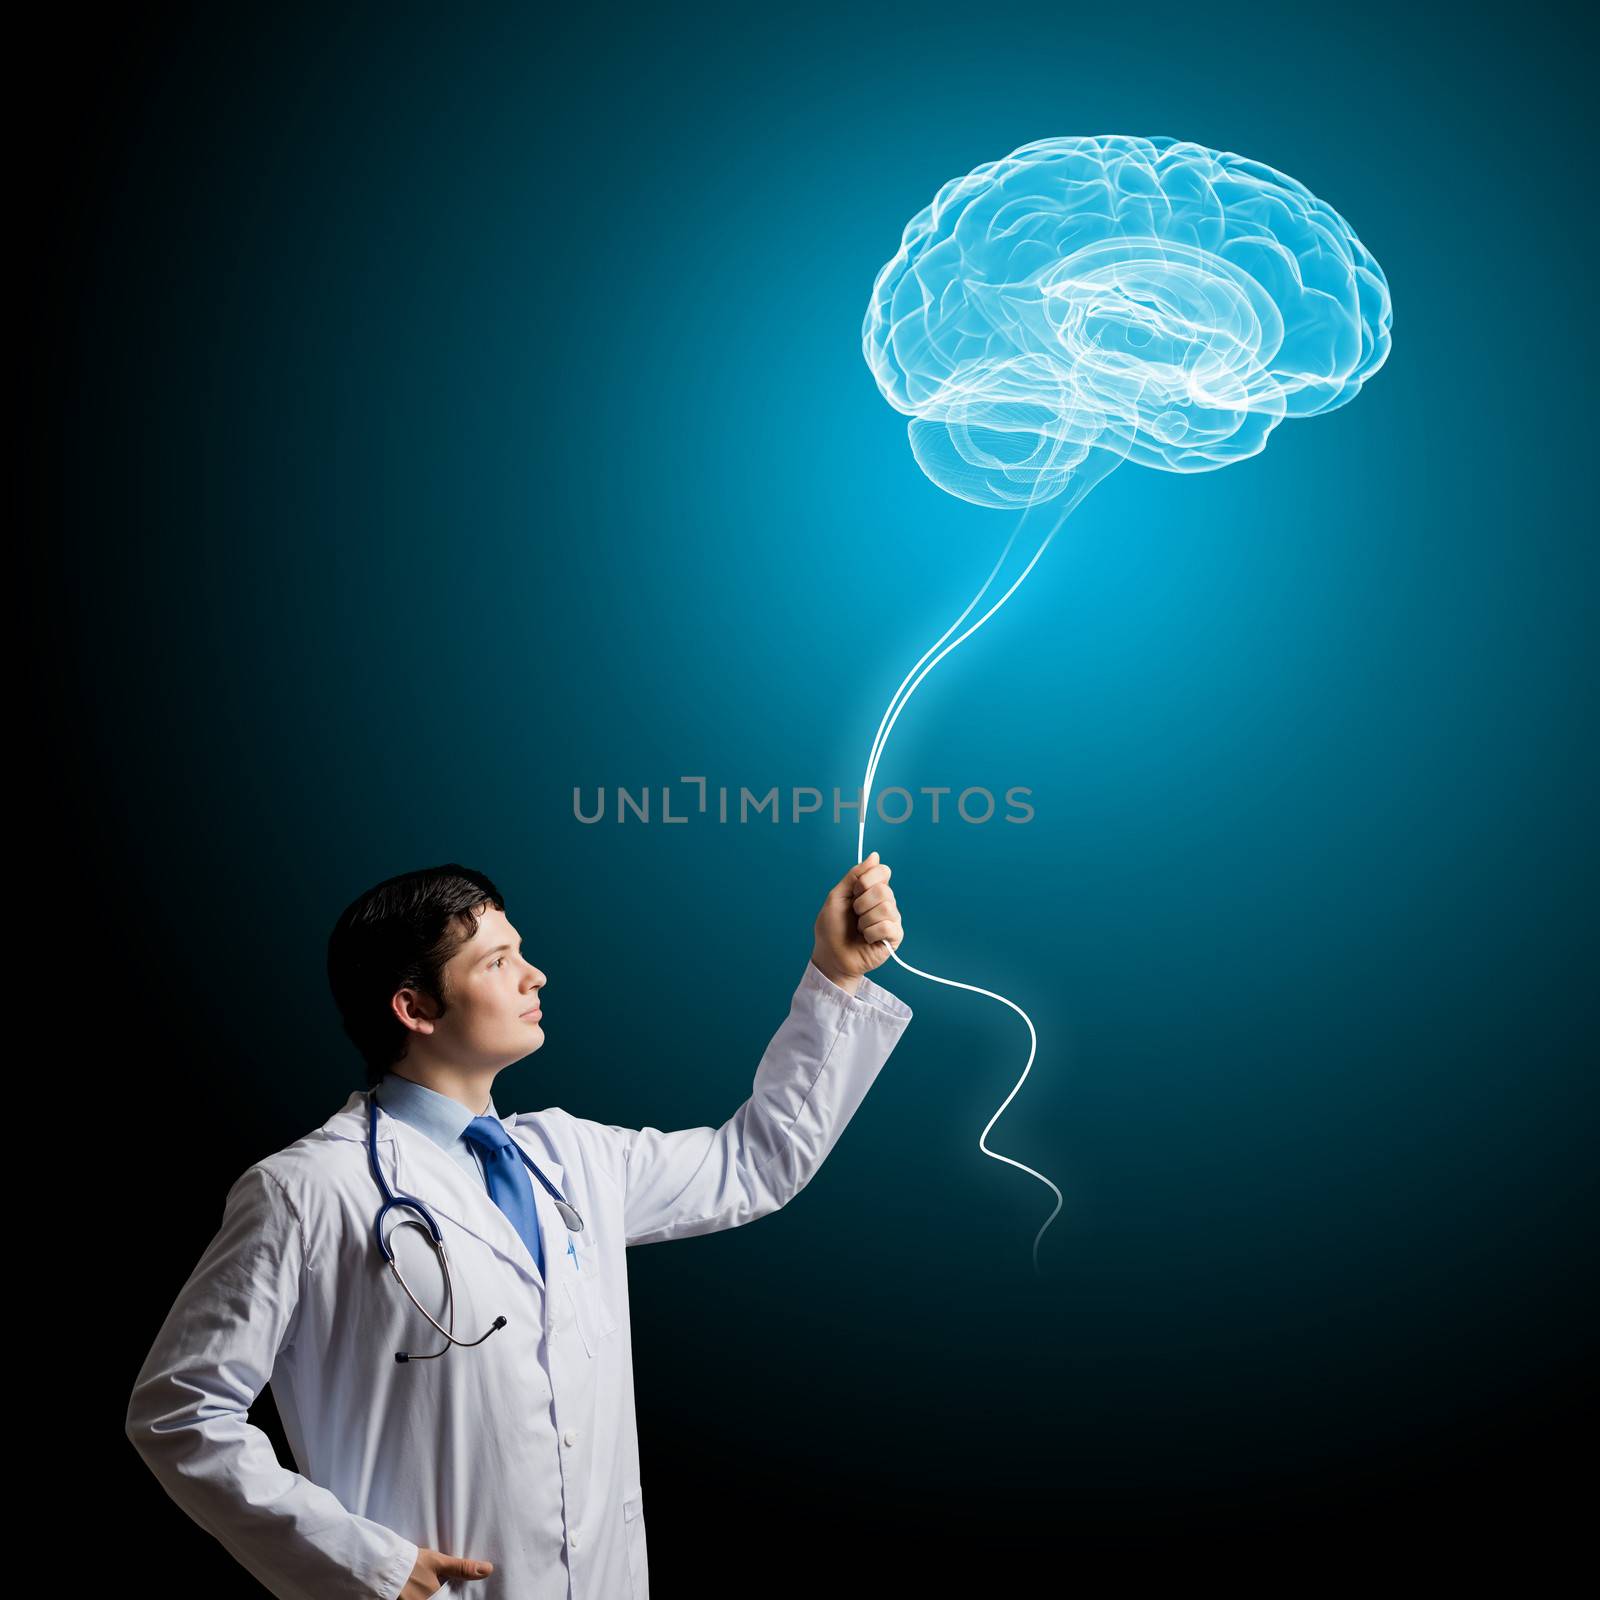 Image of young doctor neurologist against dark background